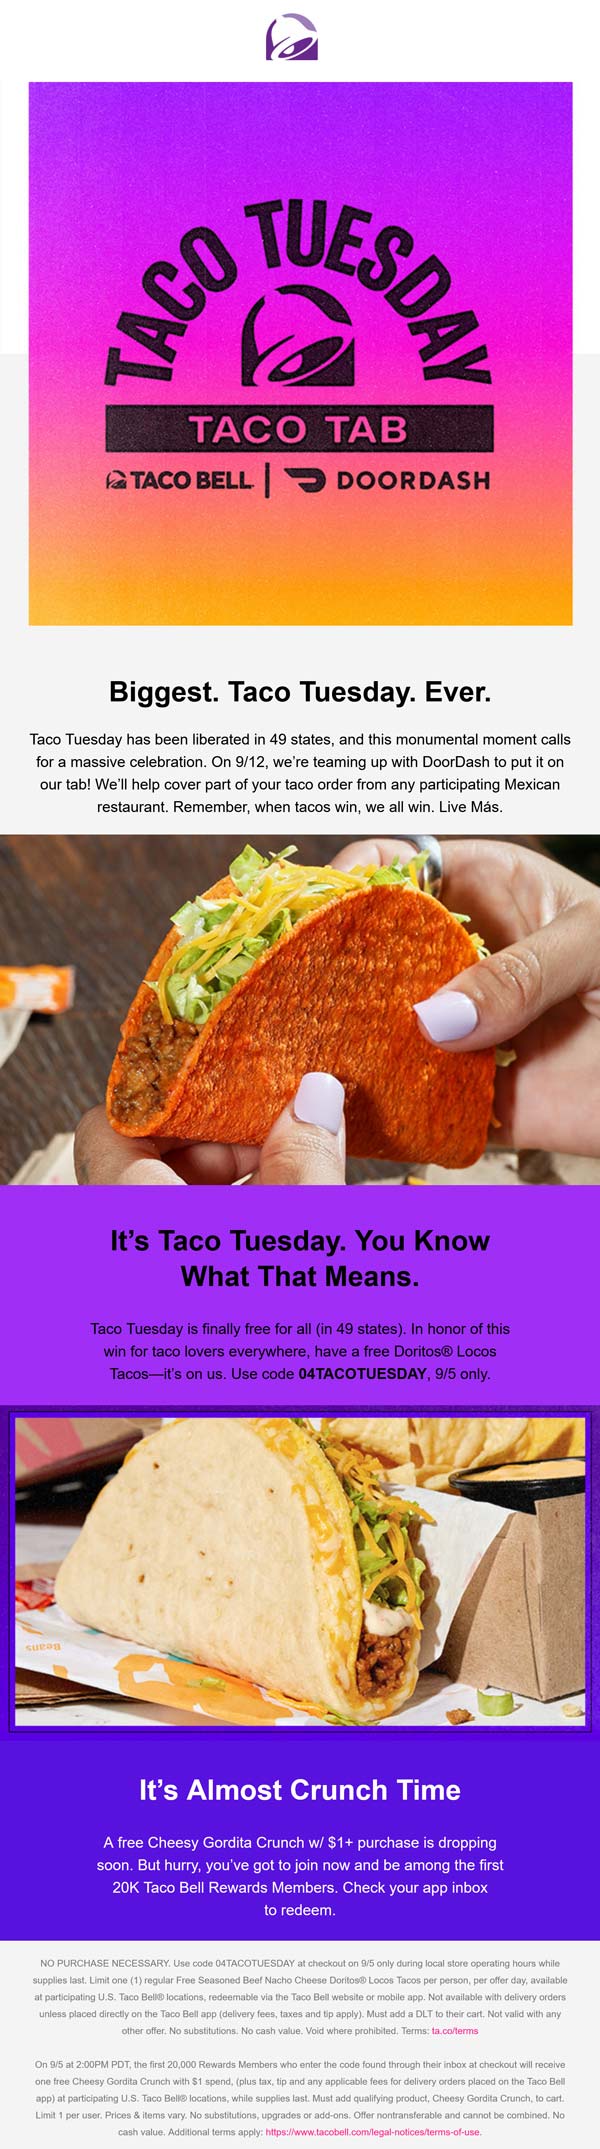 Taco Bell restaurants Coupon  Free taco + free cheesy gordita crunch on $1 today at Taco Bell via promo code 04TACOTUESDAY #tacobell 